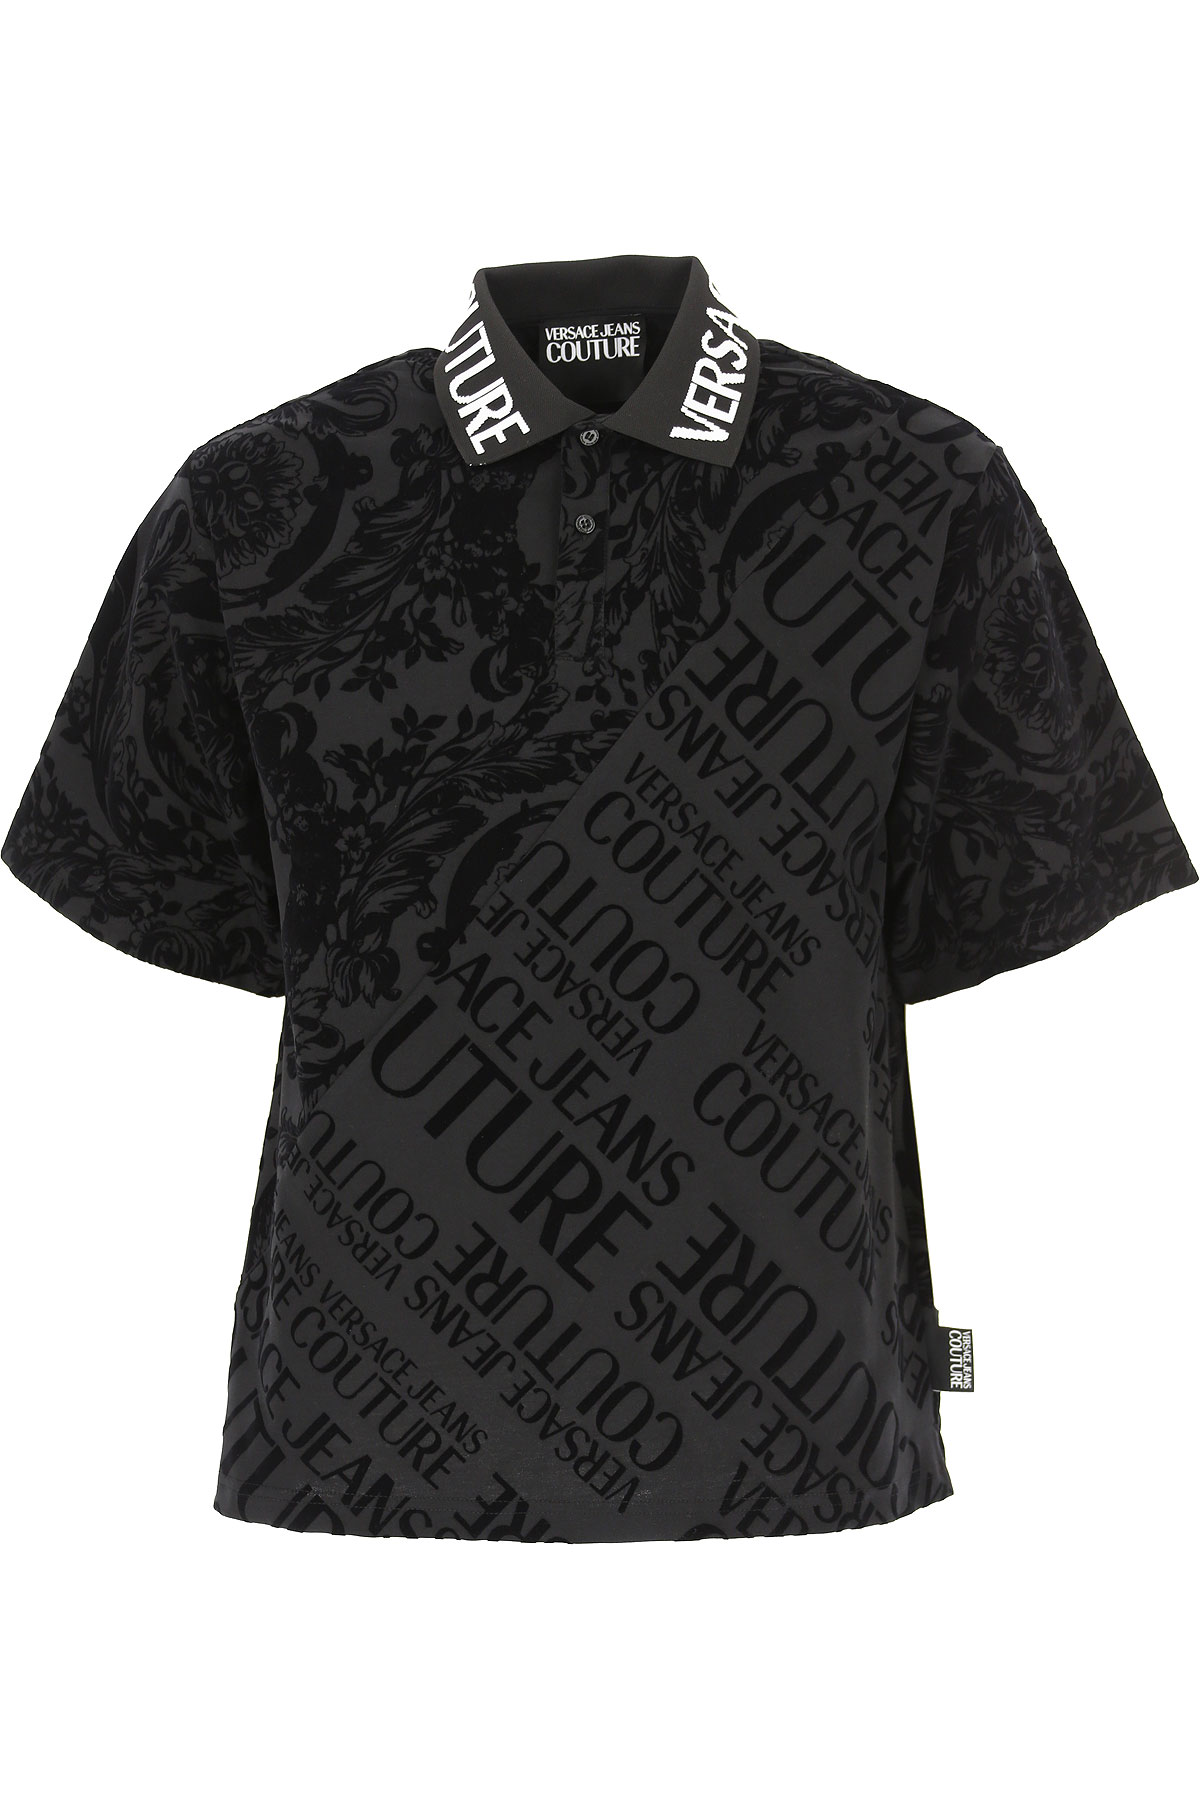 Mens Clothing Versace Jeans Couture , Style code: b3gub7p4-11697-899